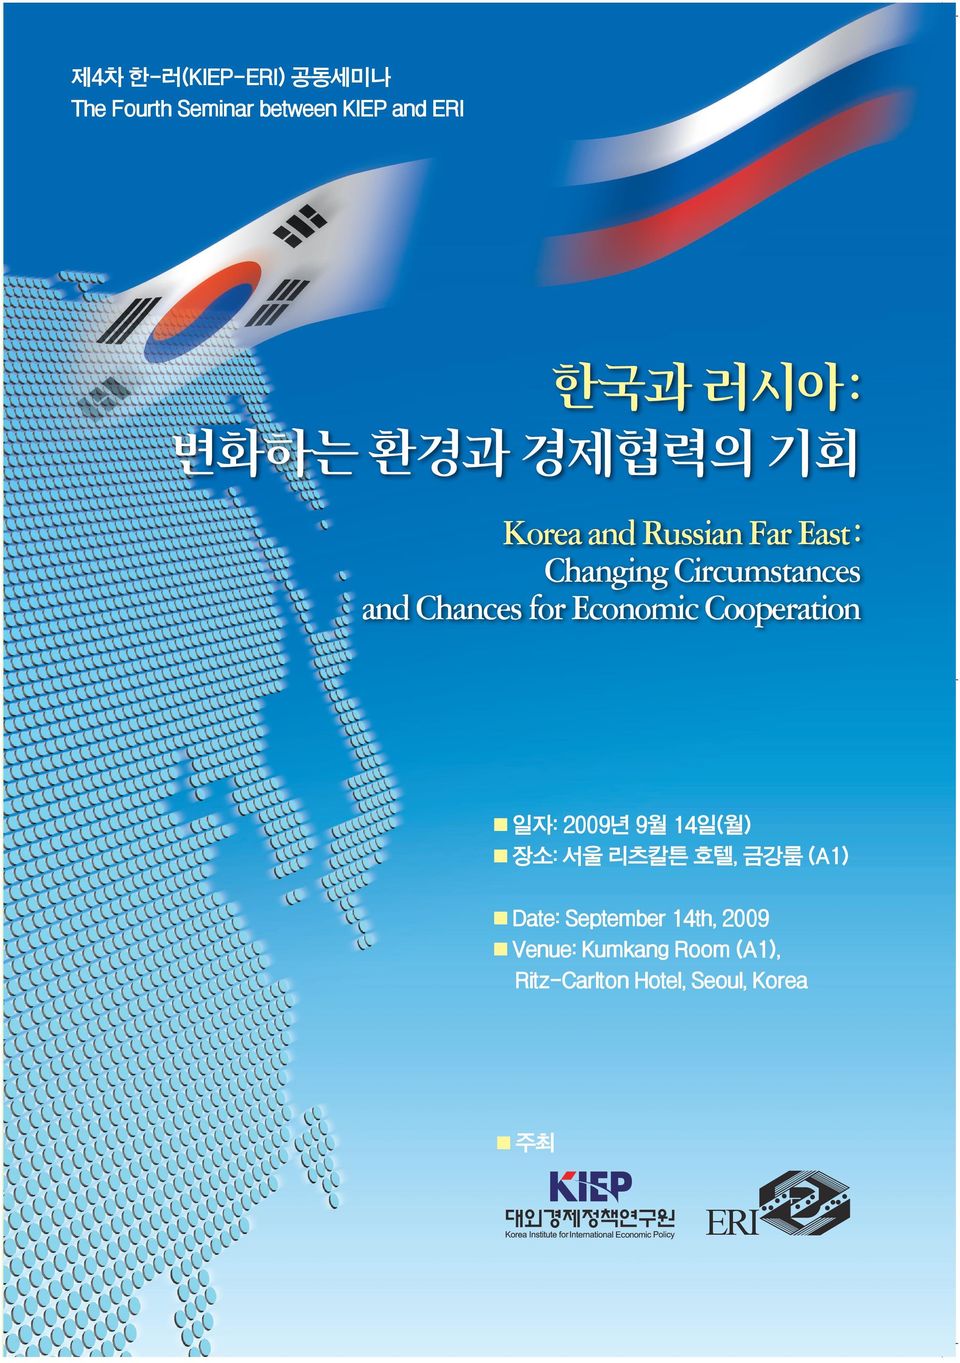 Korea and Russian Far East : Changing Circumstances and Chances for Economic Cooperation 일자: 2009년 9월 14일(월)